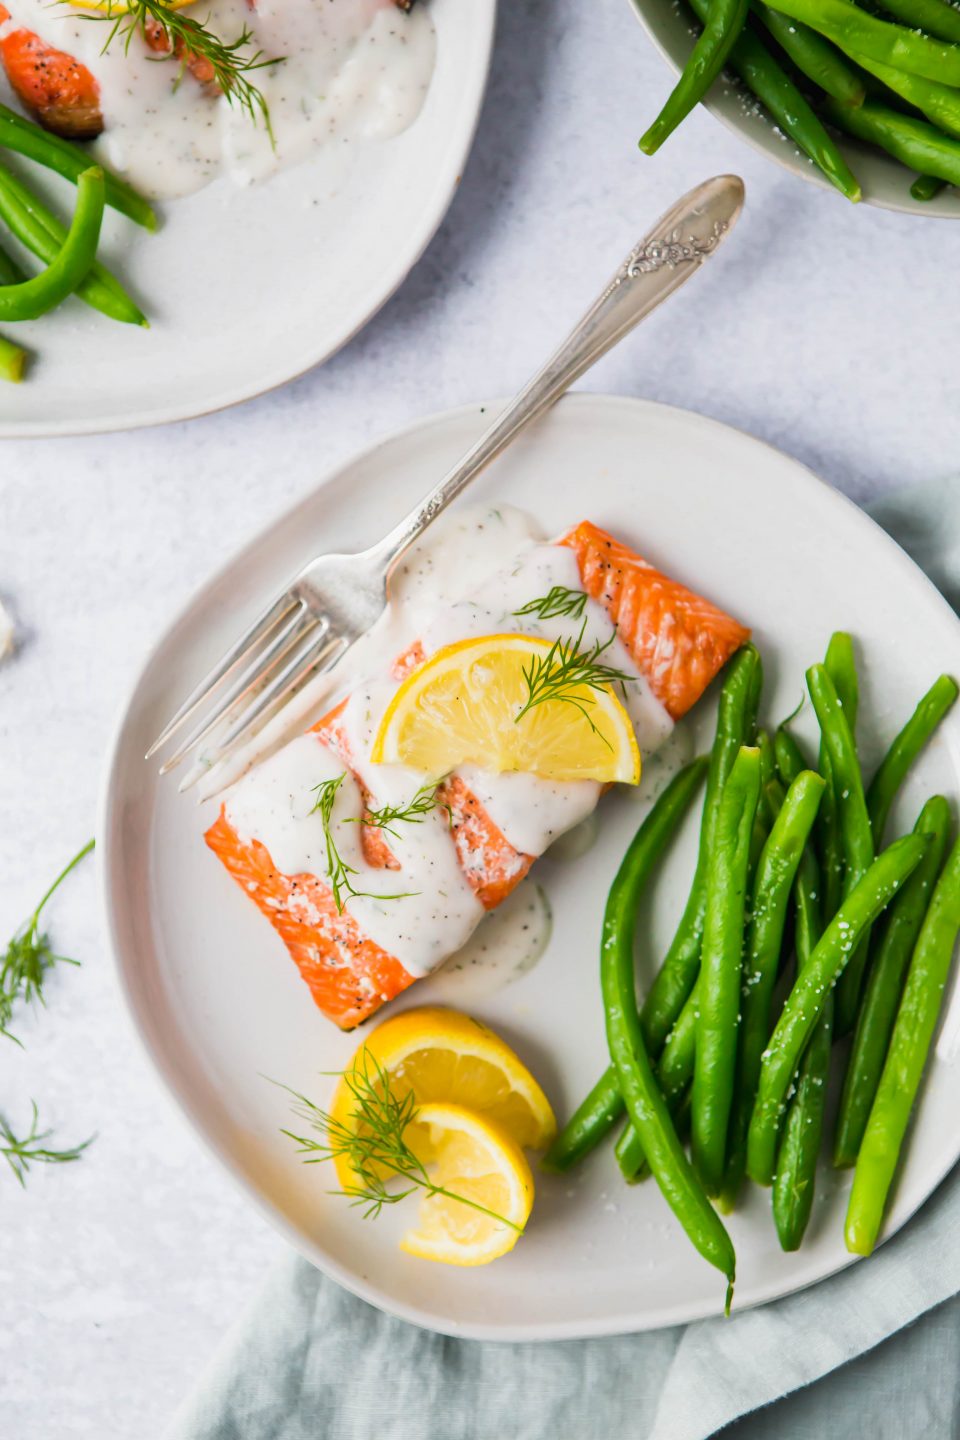 An overhead shot of a piece of salmon drizzled with a cream sauce. Lemon slices and green beans are also on the plate.